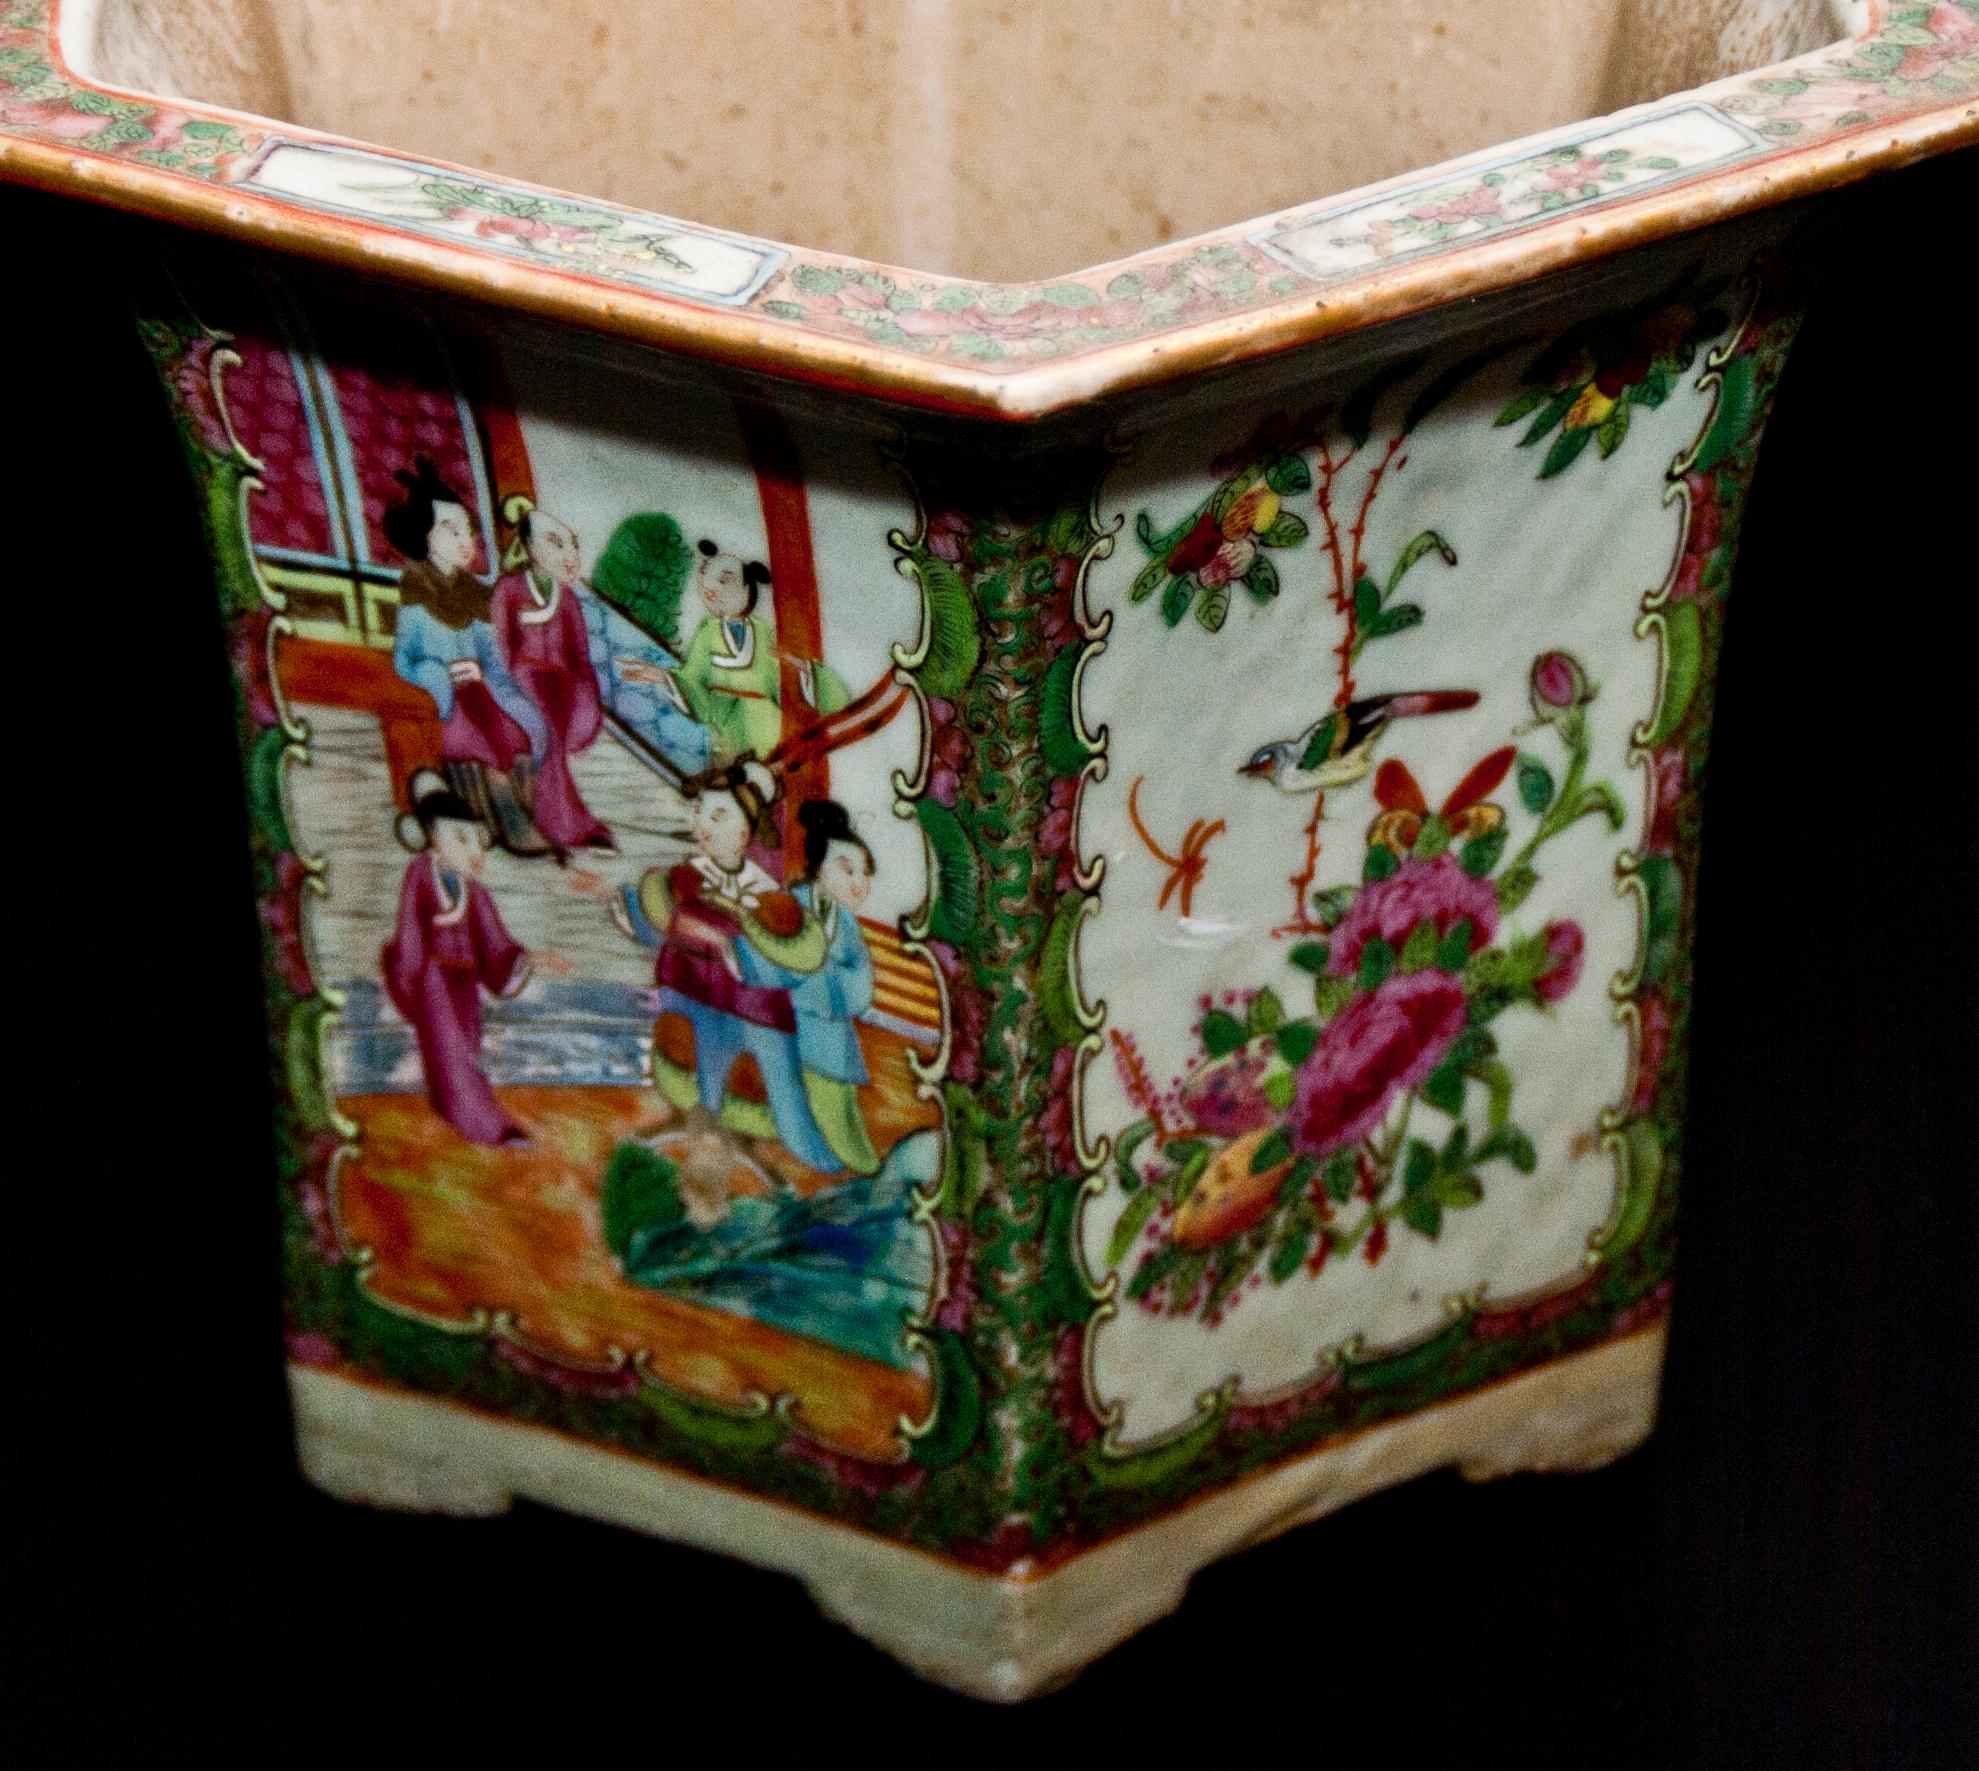 Late 19th century.
Polychrome porcelain decorated with court life and celebrations scenes. 
Very good conditions.

This artwork is shipped from Italy. Under existing legislation, any artwork in Italy created over 70 years ago by an artist who has